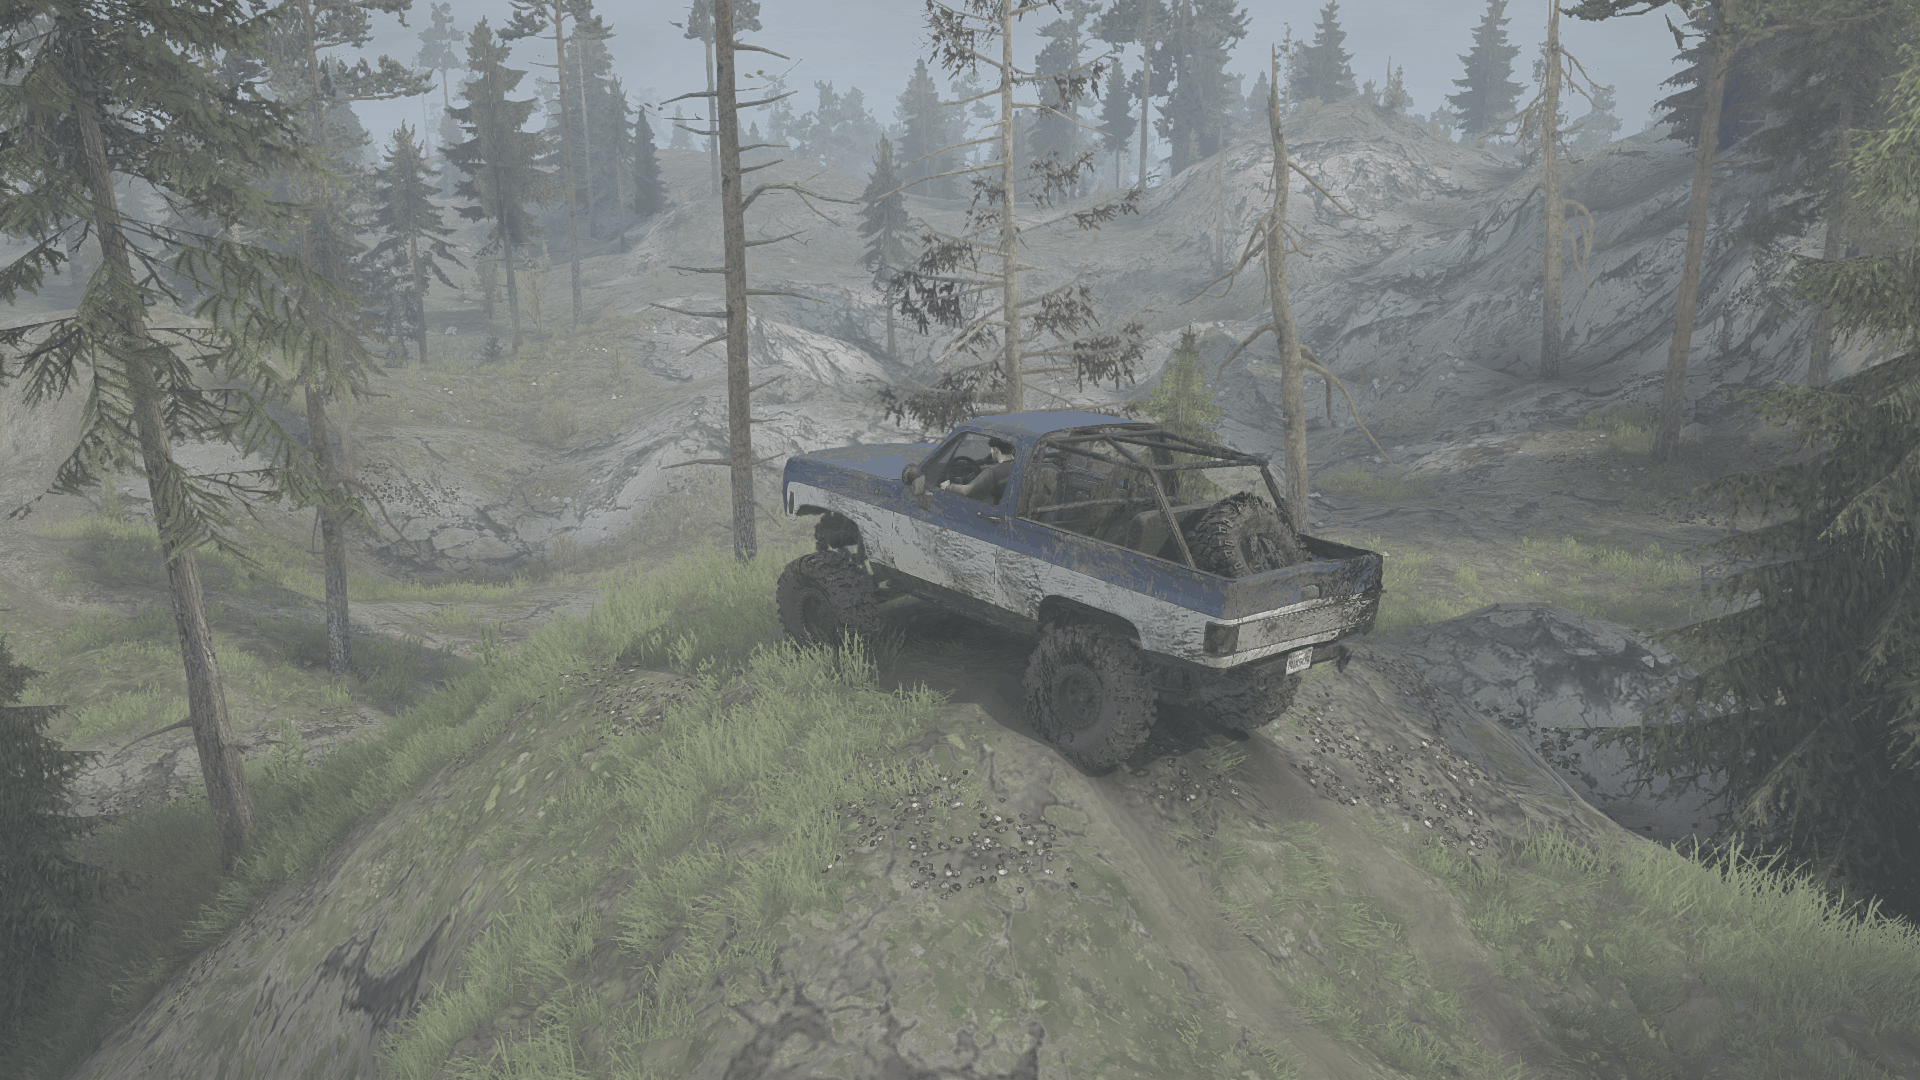 Expeditions a mudrunner game чит. Игра SPINTIRES MUDRUNNER 2. Spin Tires MUDRUNNER Урал 4320. MUDRUNNER с400. Spin Tires MUDRUNNER карты.